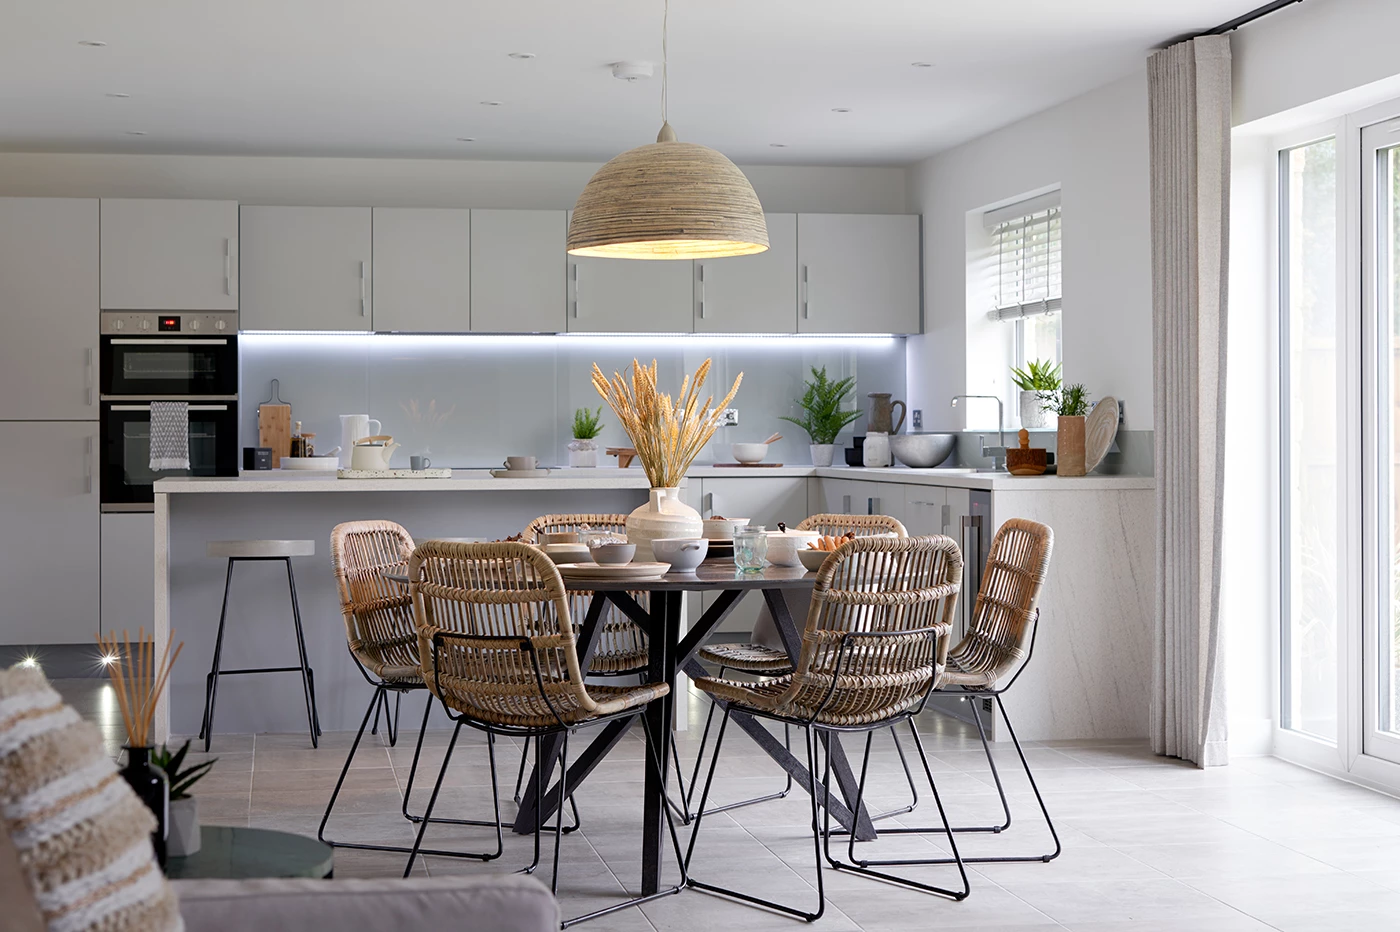 Strata have recently launched their latest collection of homes at Esteem, Dishforth